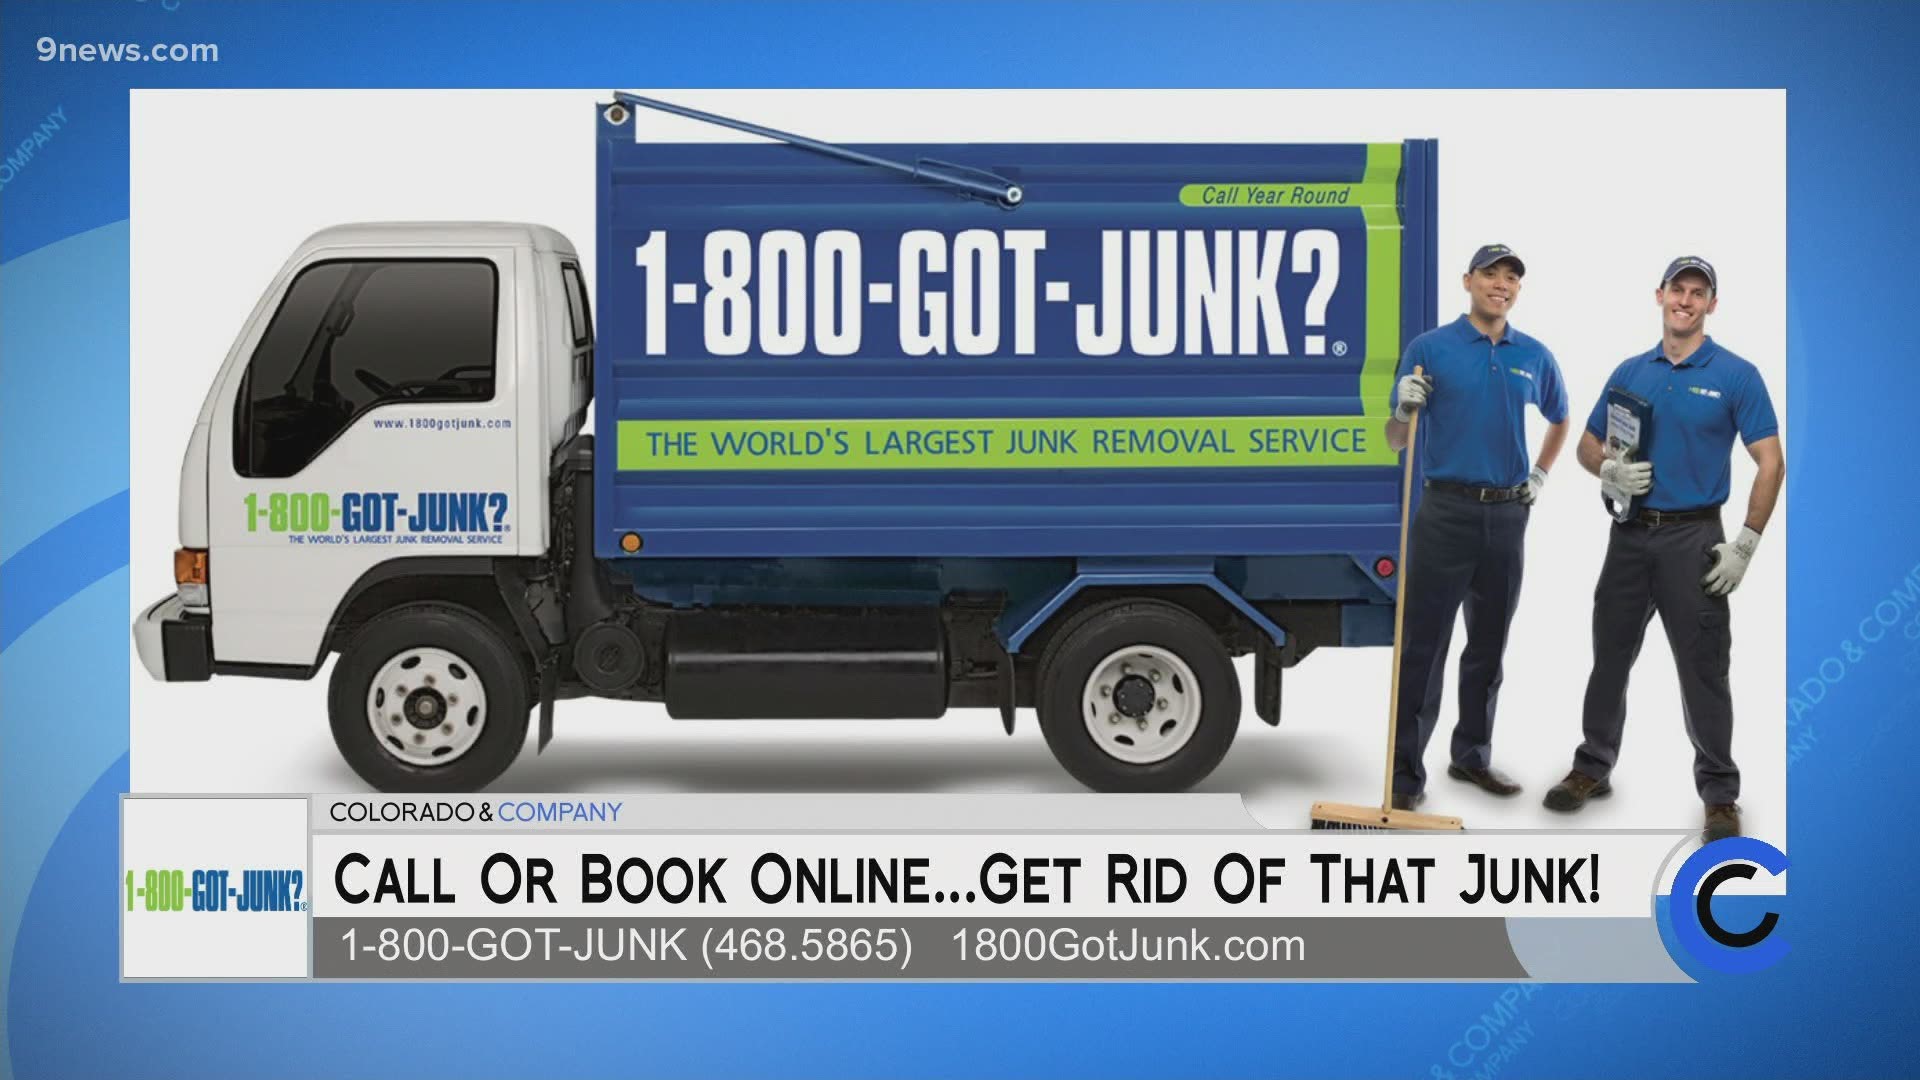 1.800.GOT.JUNK is the largest junk removal service in the world! Their number is in the name, so give them a call, or visit 1800GotJunk.com to get started.